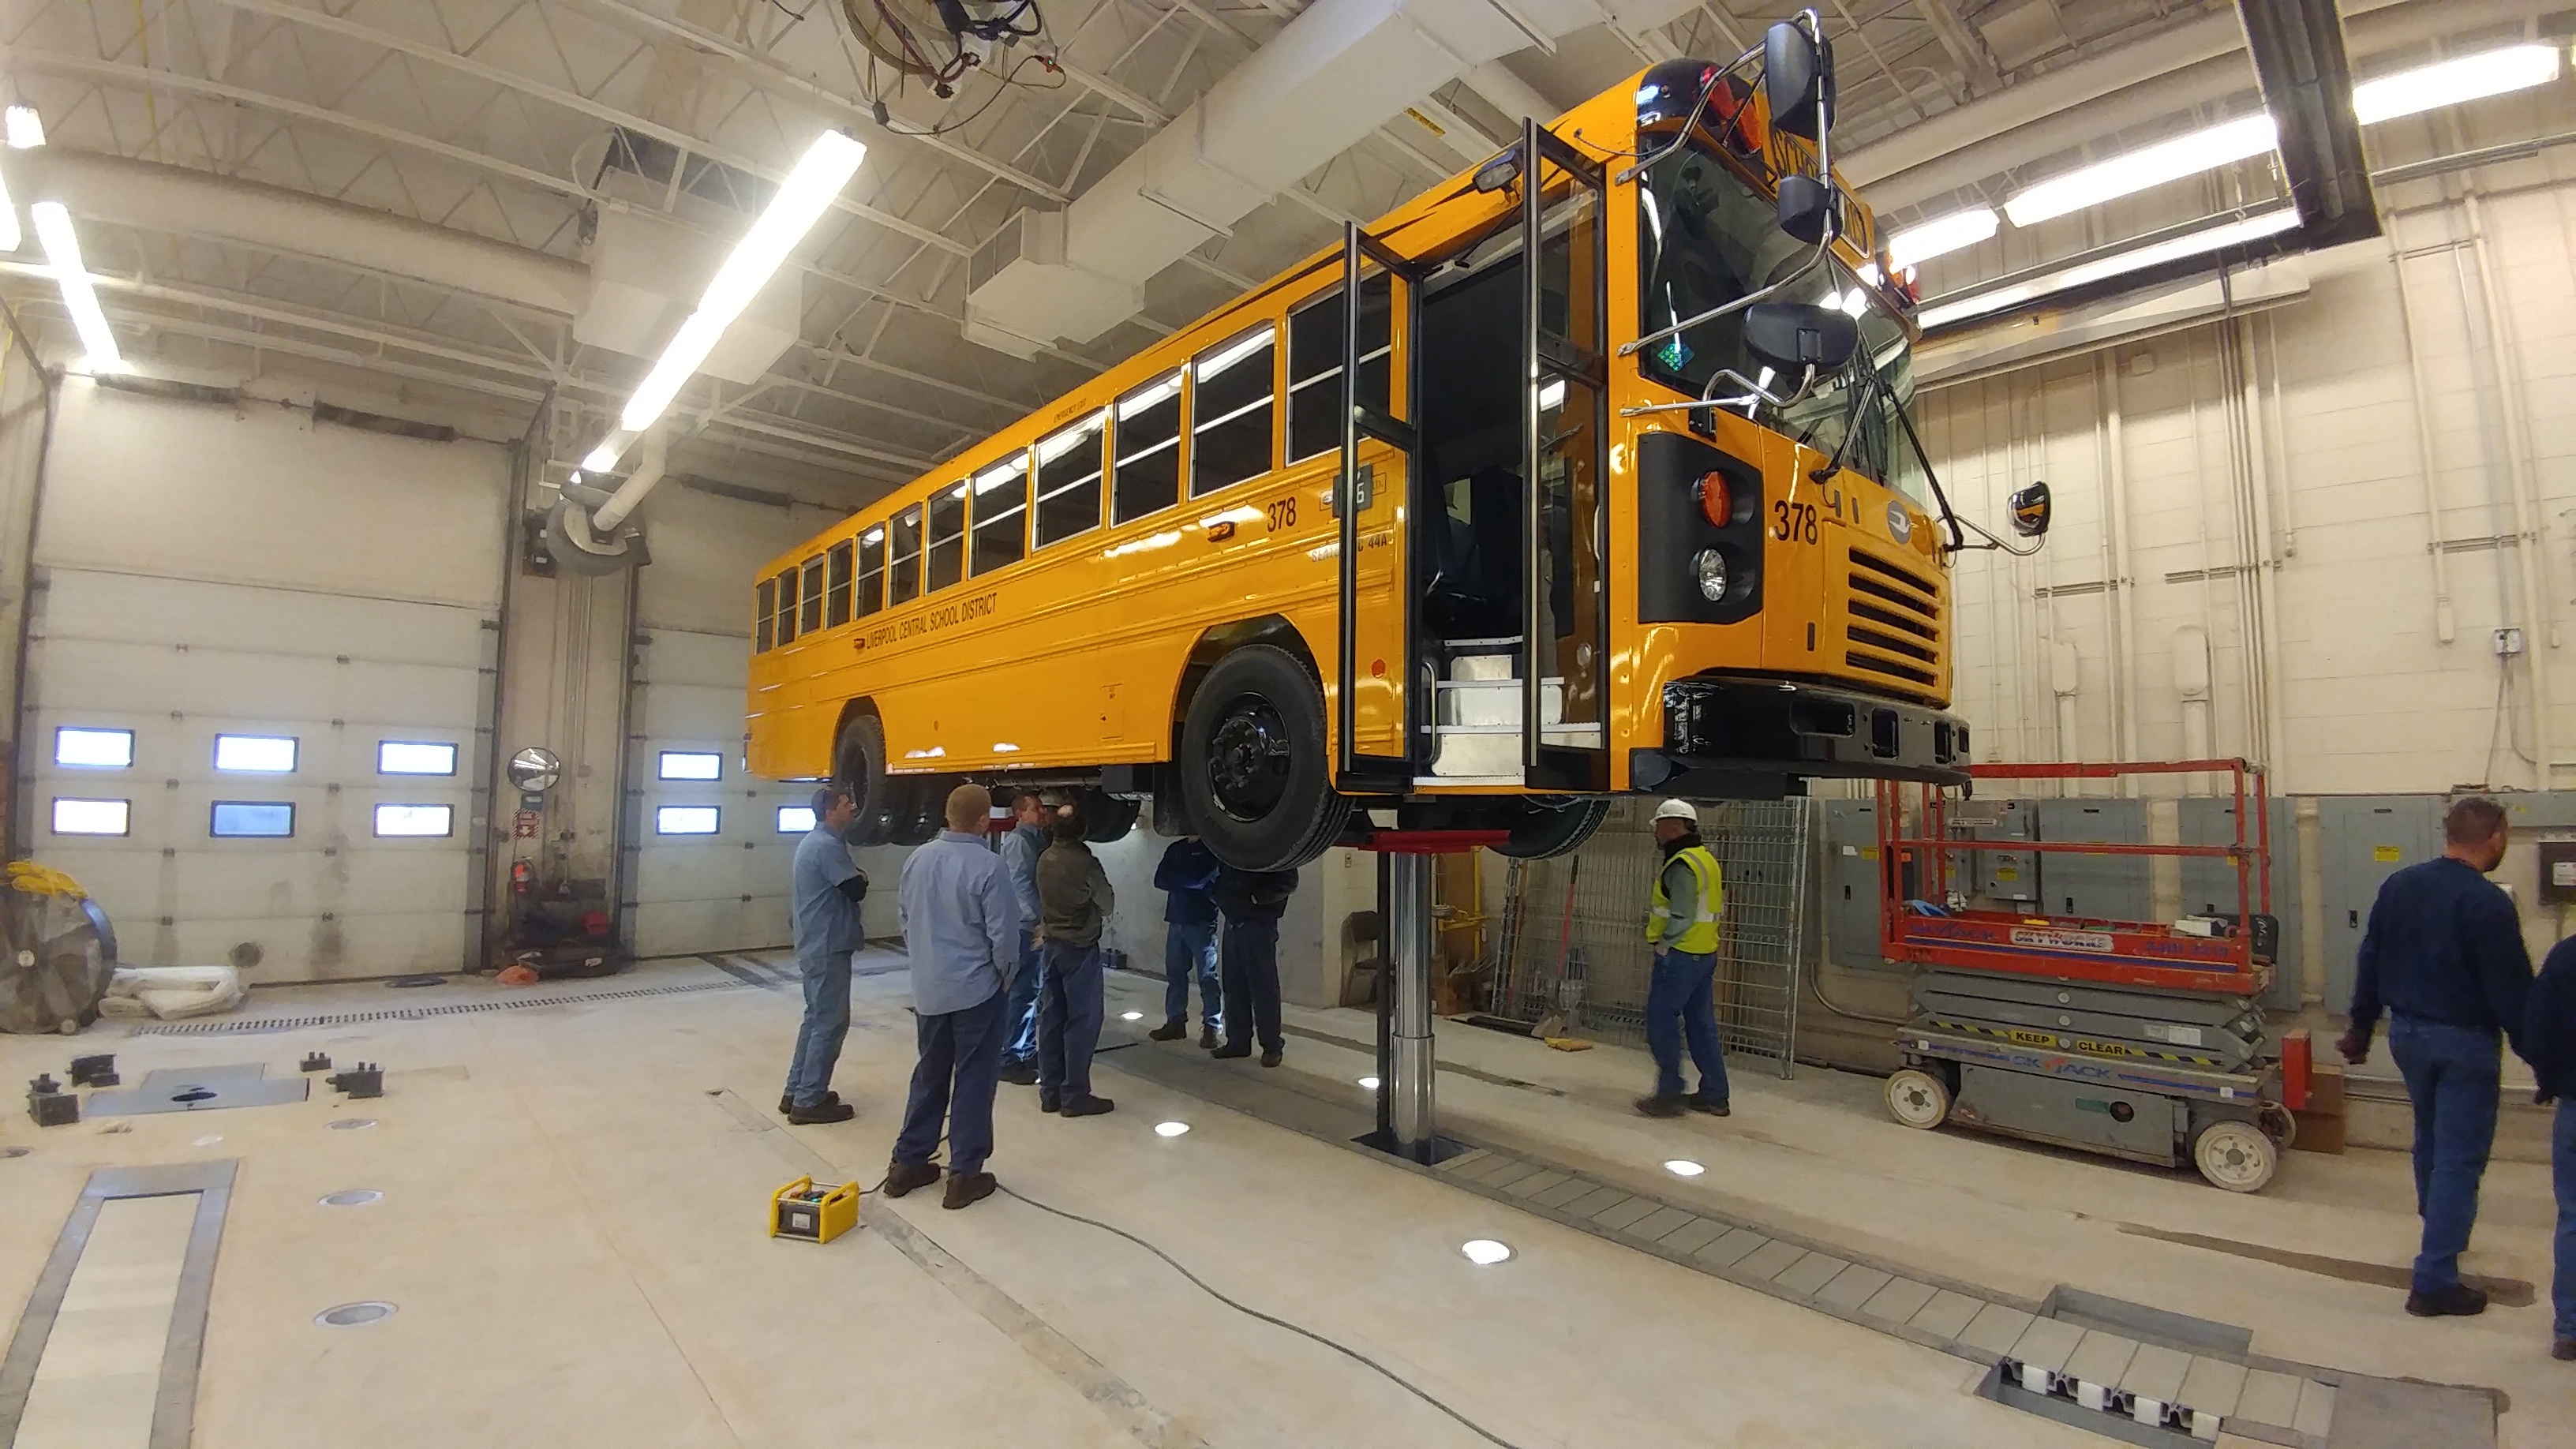 Complete access to the vehicle enables safe and efficient service and maintenance. Here, technicians inspect a school bus on Stertil-Koni's high-pressure telescopic piston lift, the DIAMONDLIFT.